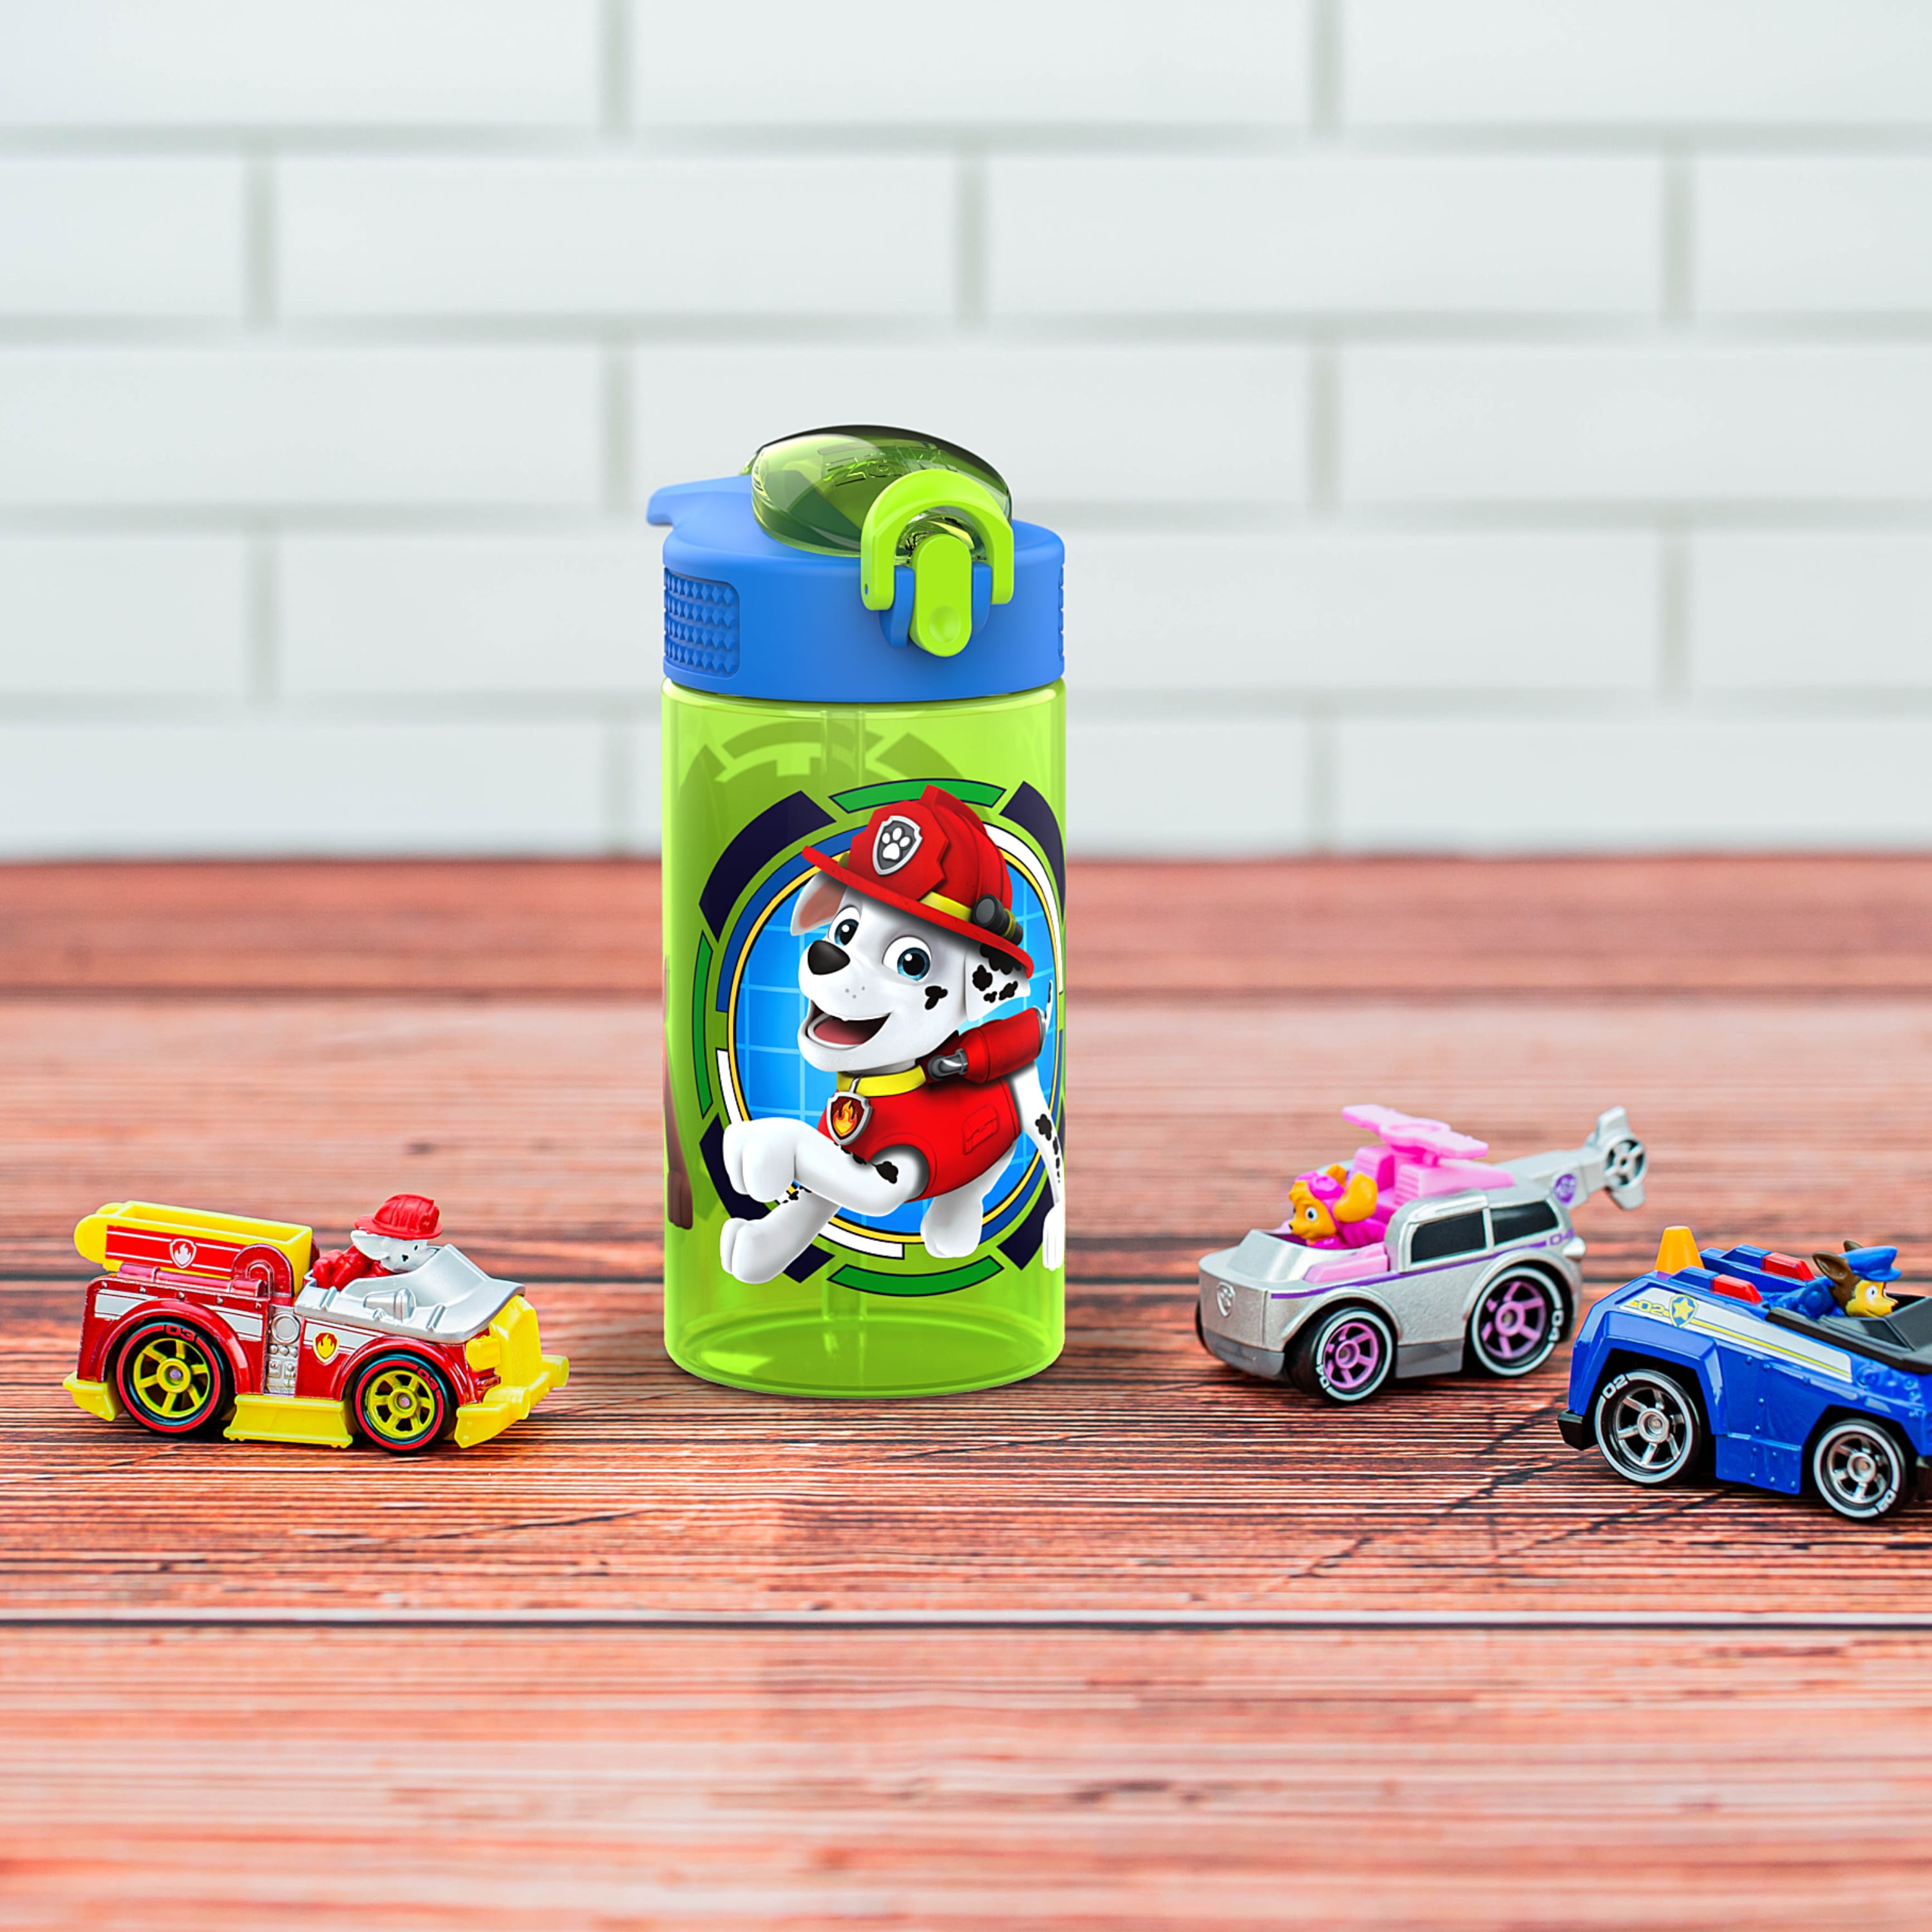 Zak Designs Paw Patrol 15 Ounce Plastic Tumbler with Lid and Straw,  Marshall and Skye, 2-piece set 